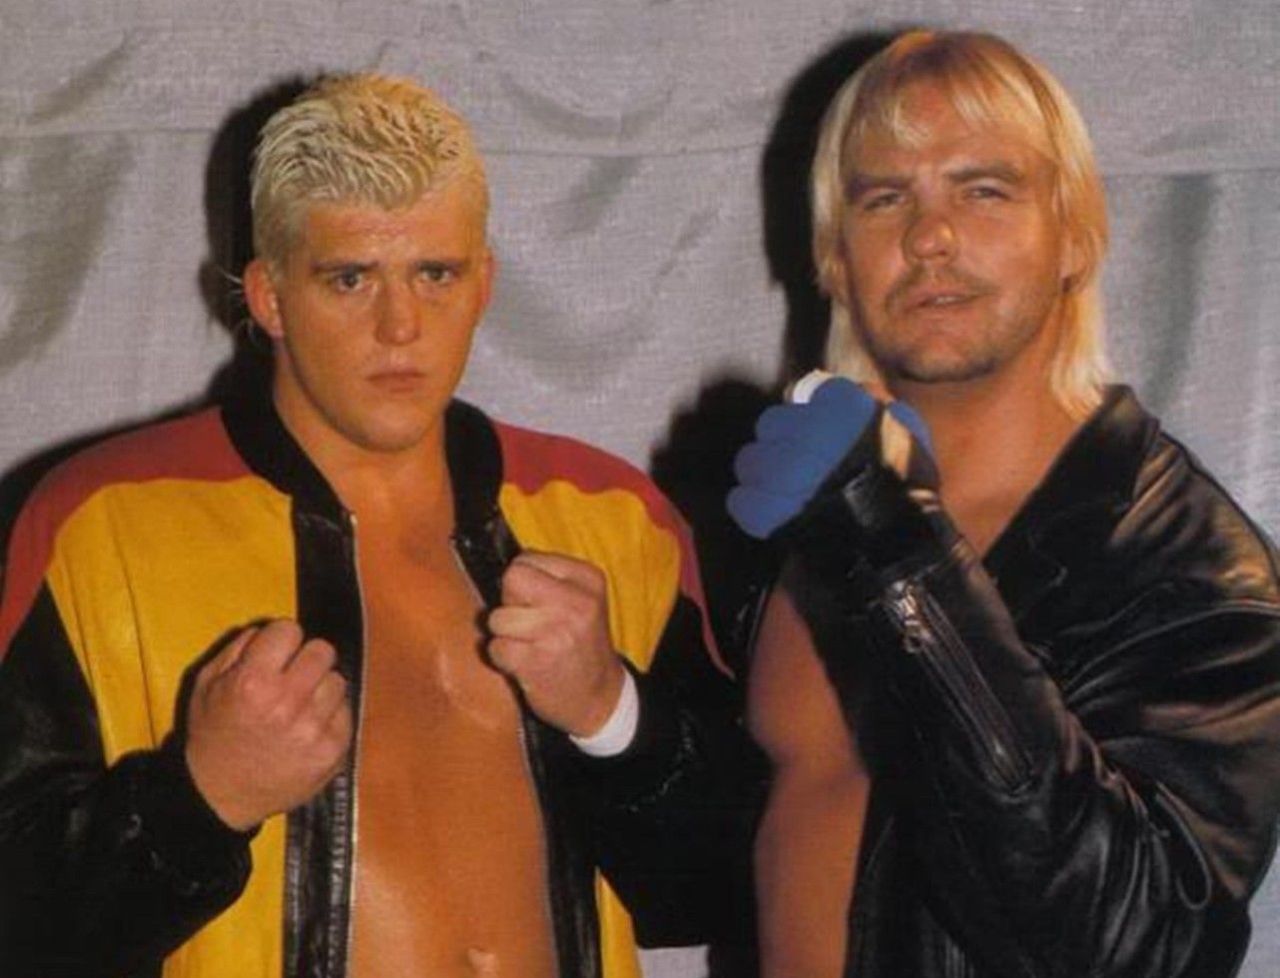 Dustin Rhodes and Barry Windham